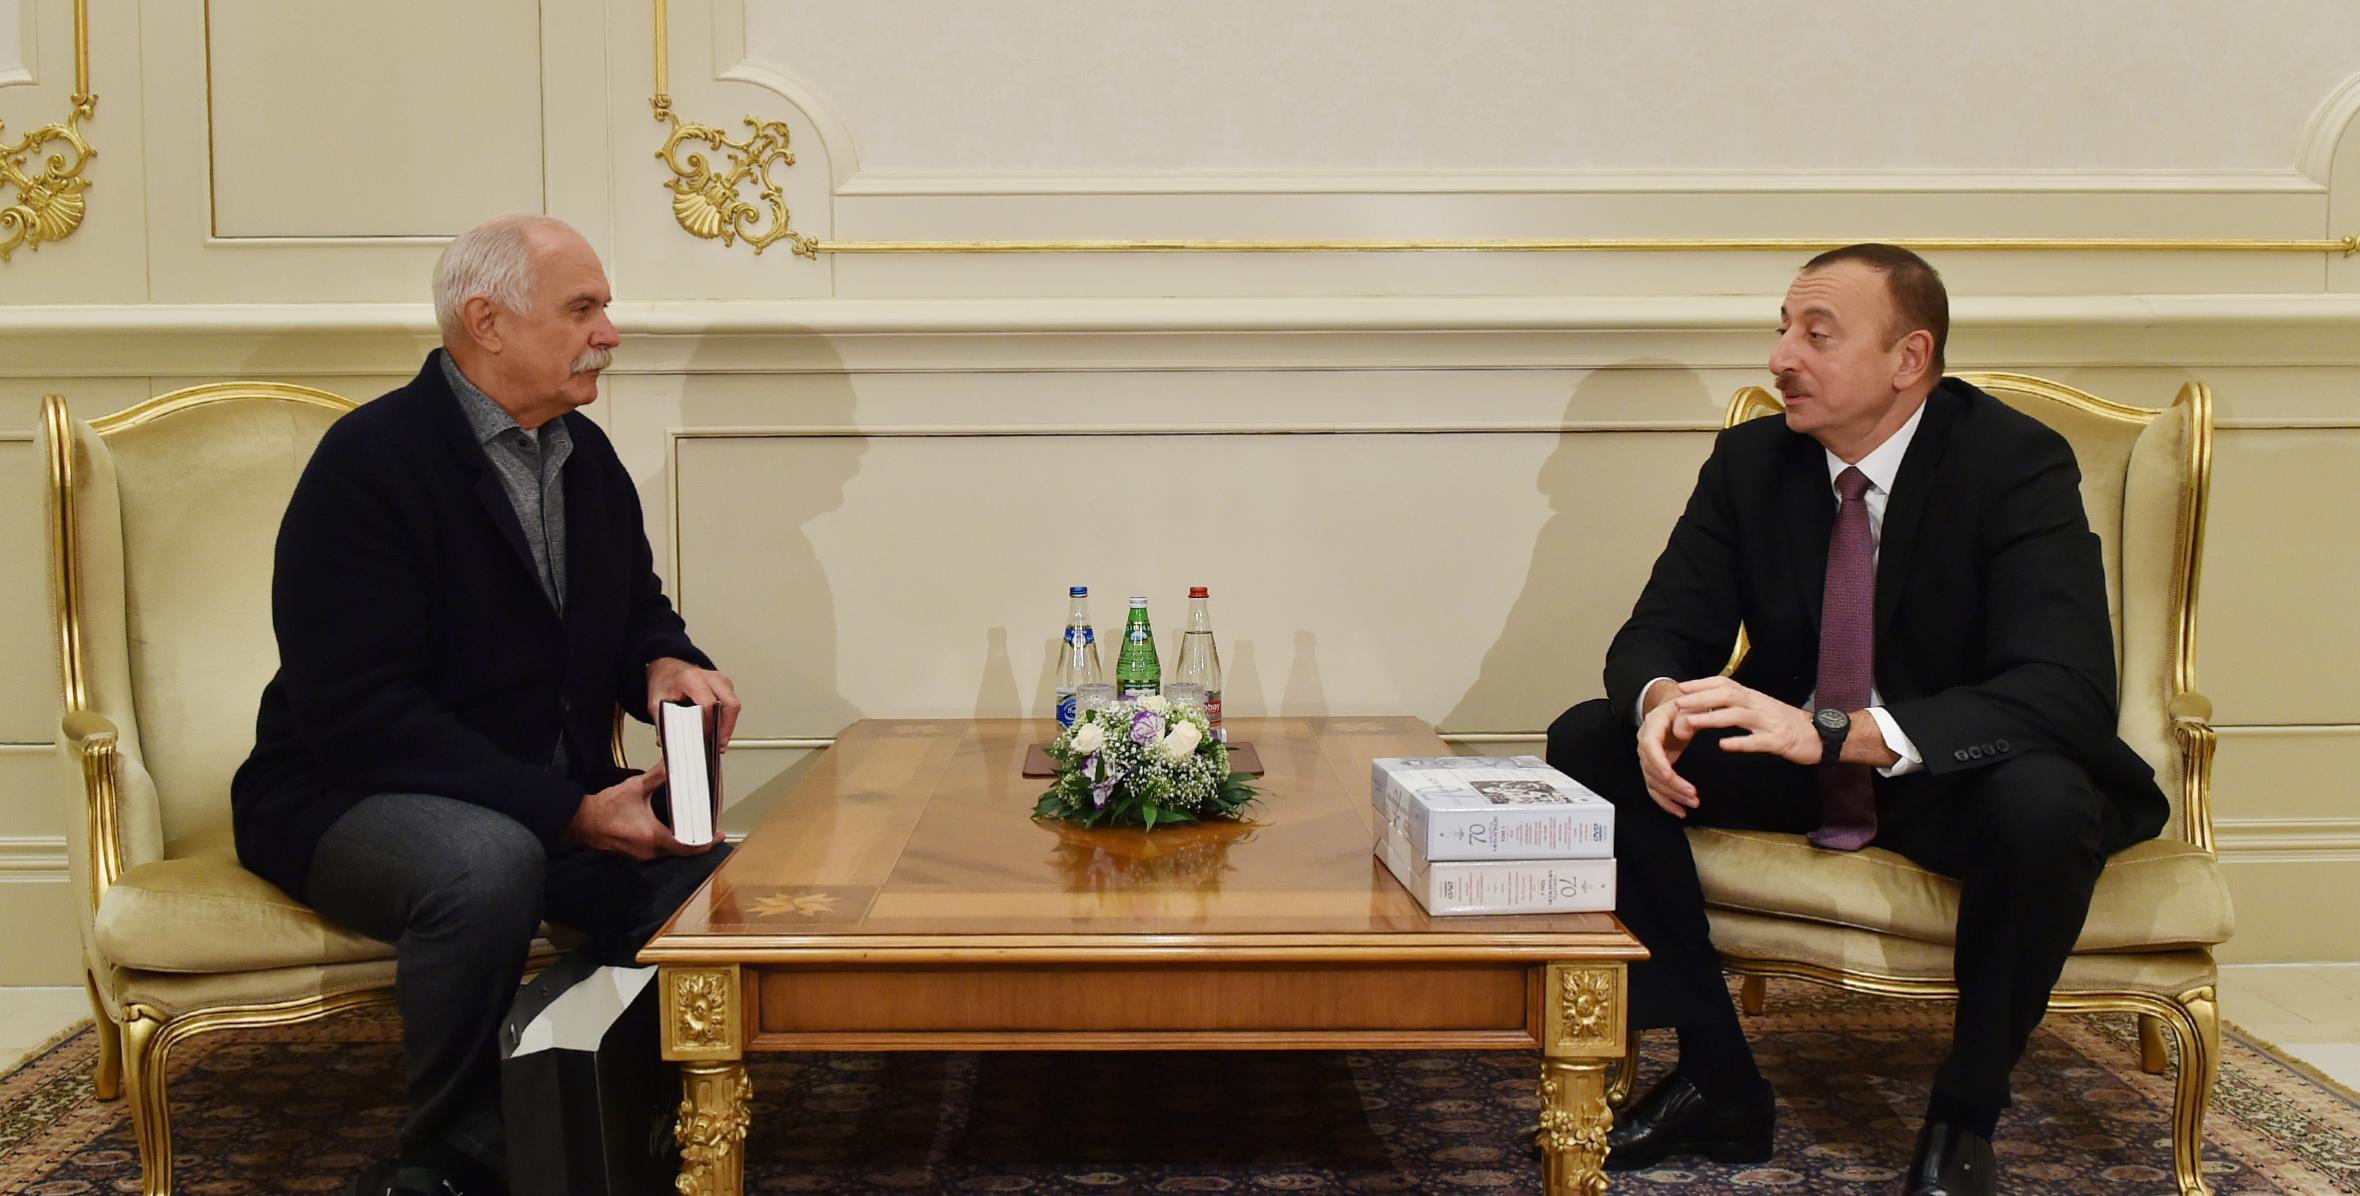 Ilham Aliyev received the chairman of the Russian Cinematographers Union